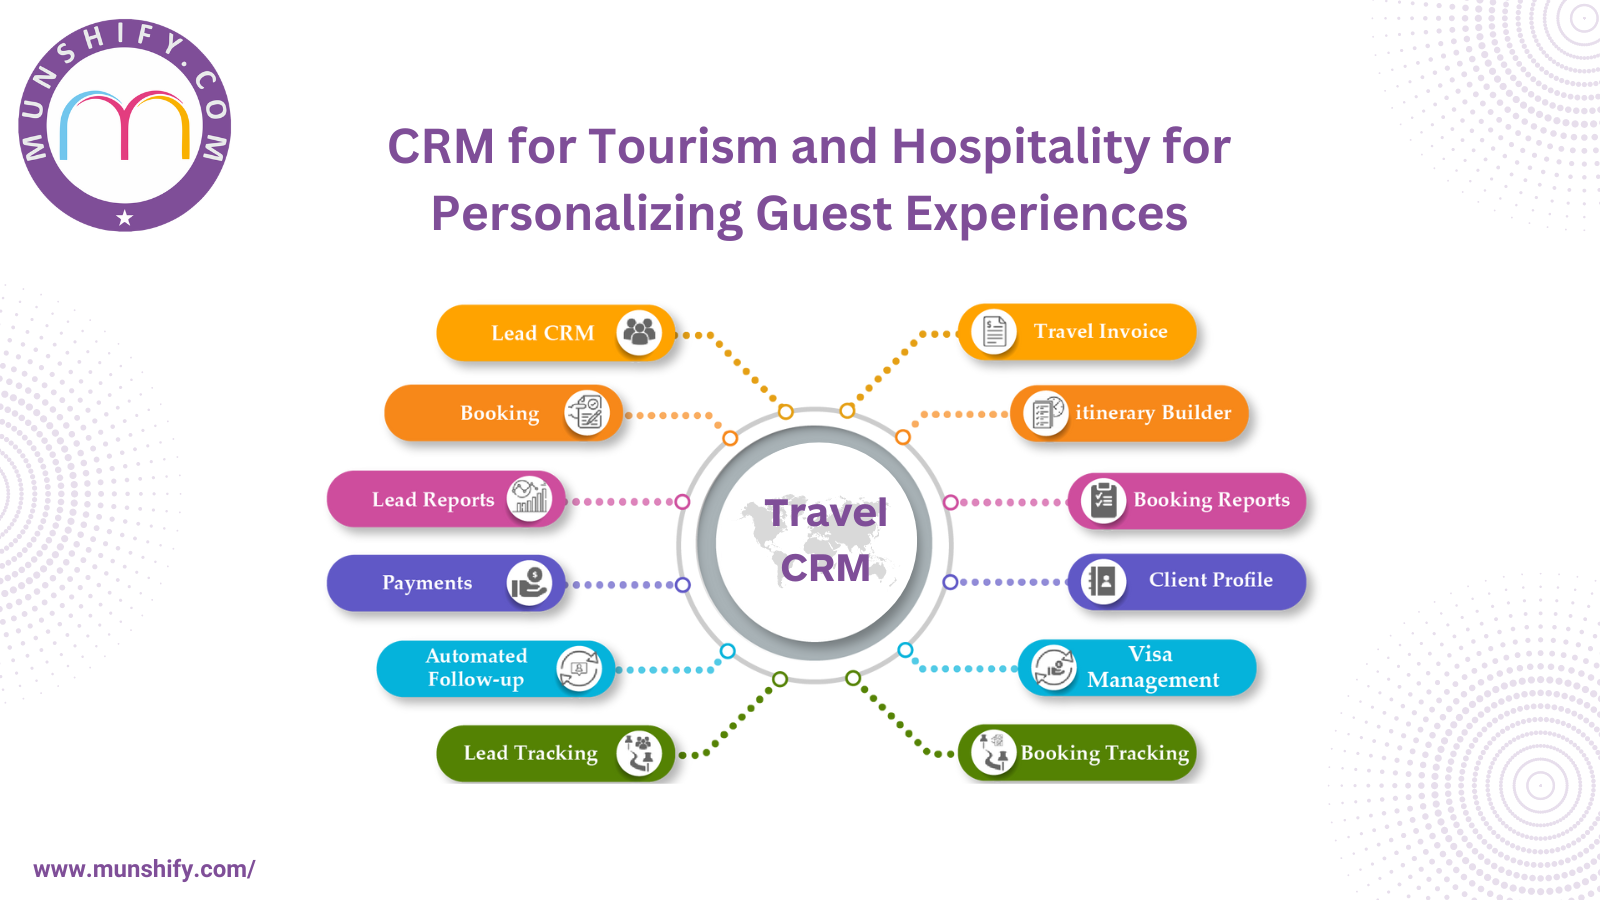 CRM for Tourism and Hospitality for Personalizing Guest Experiences  